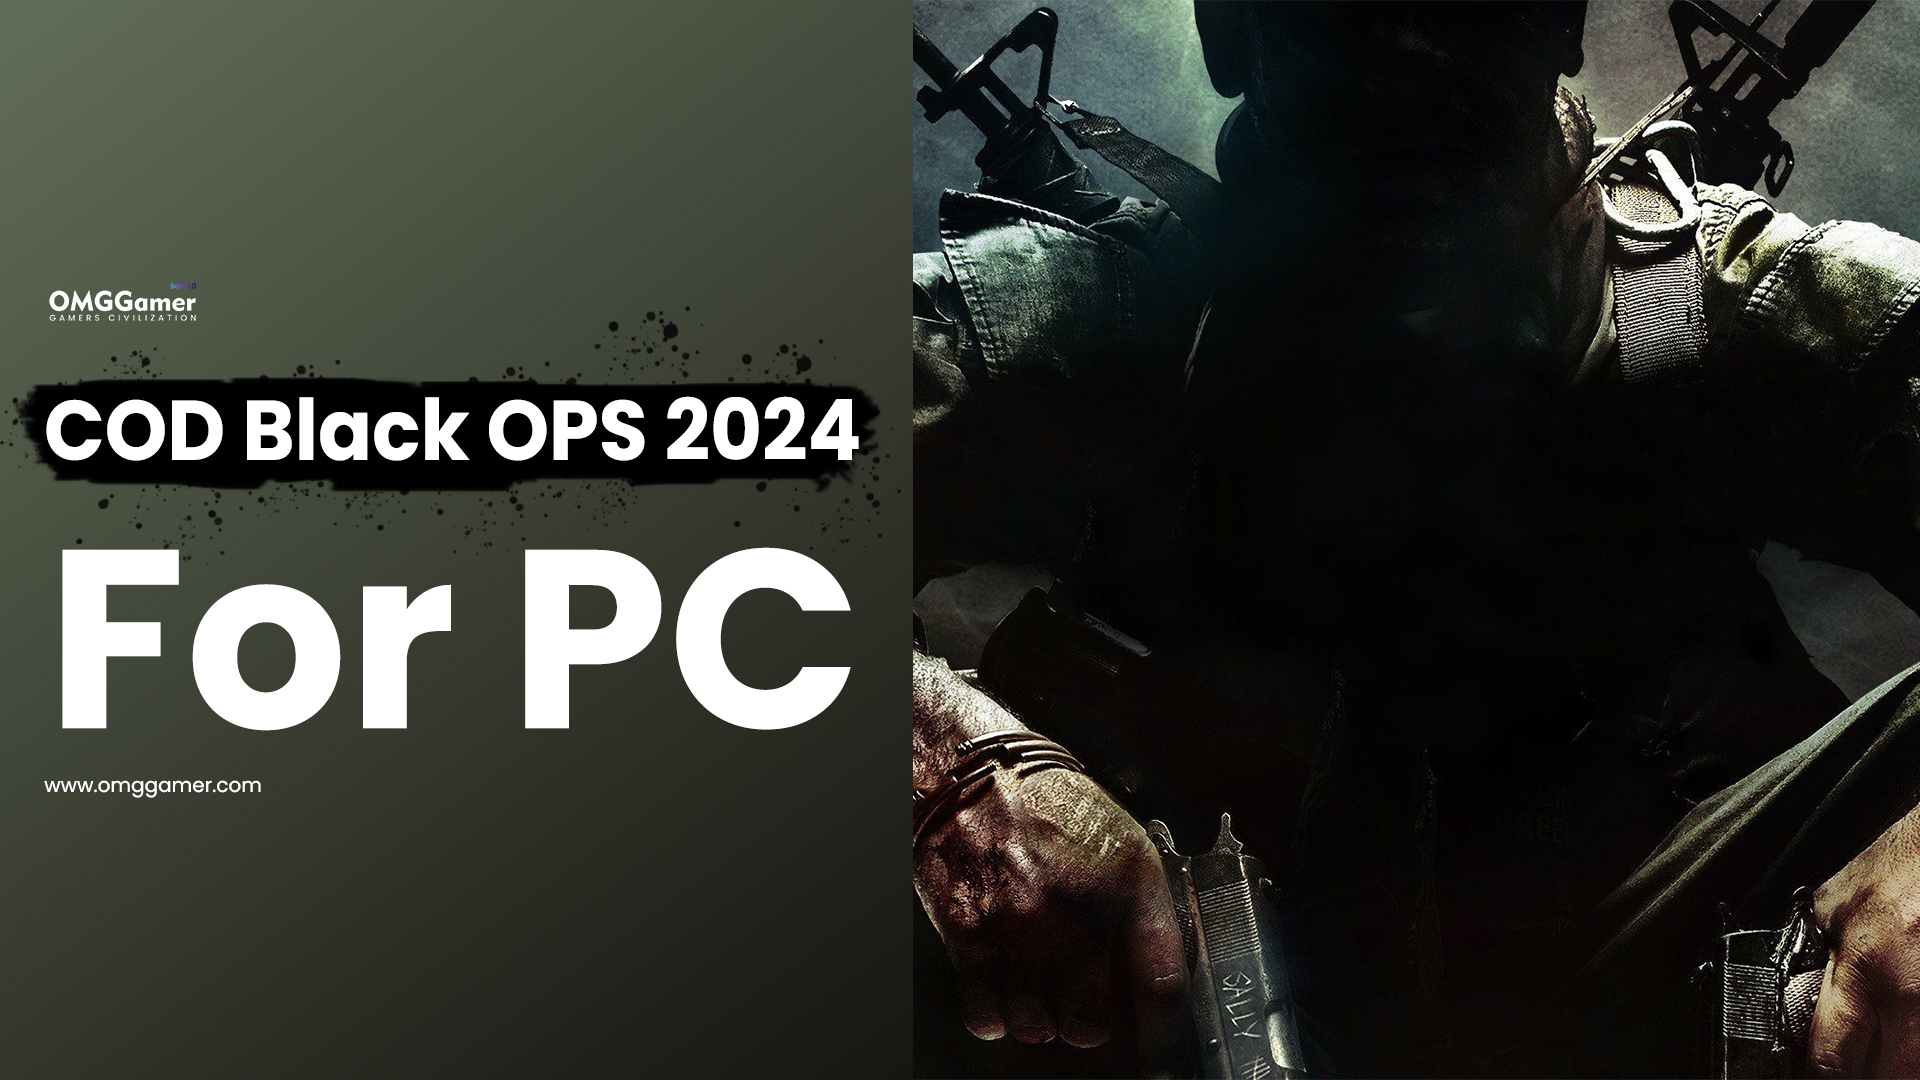 COD Black OPS 2024 for PC